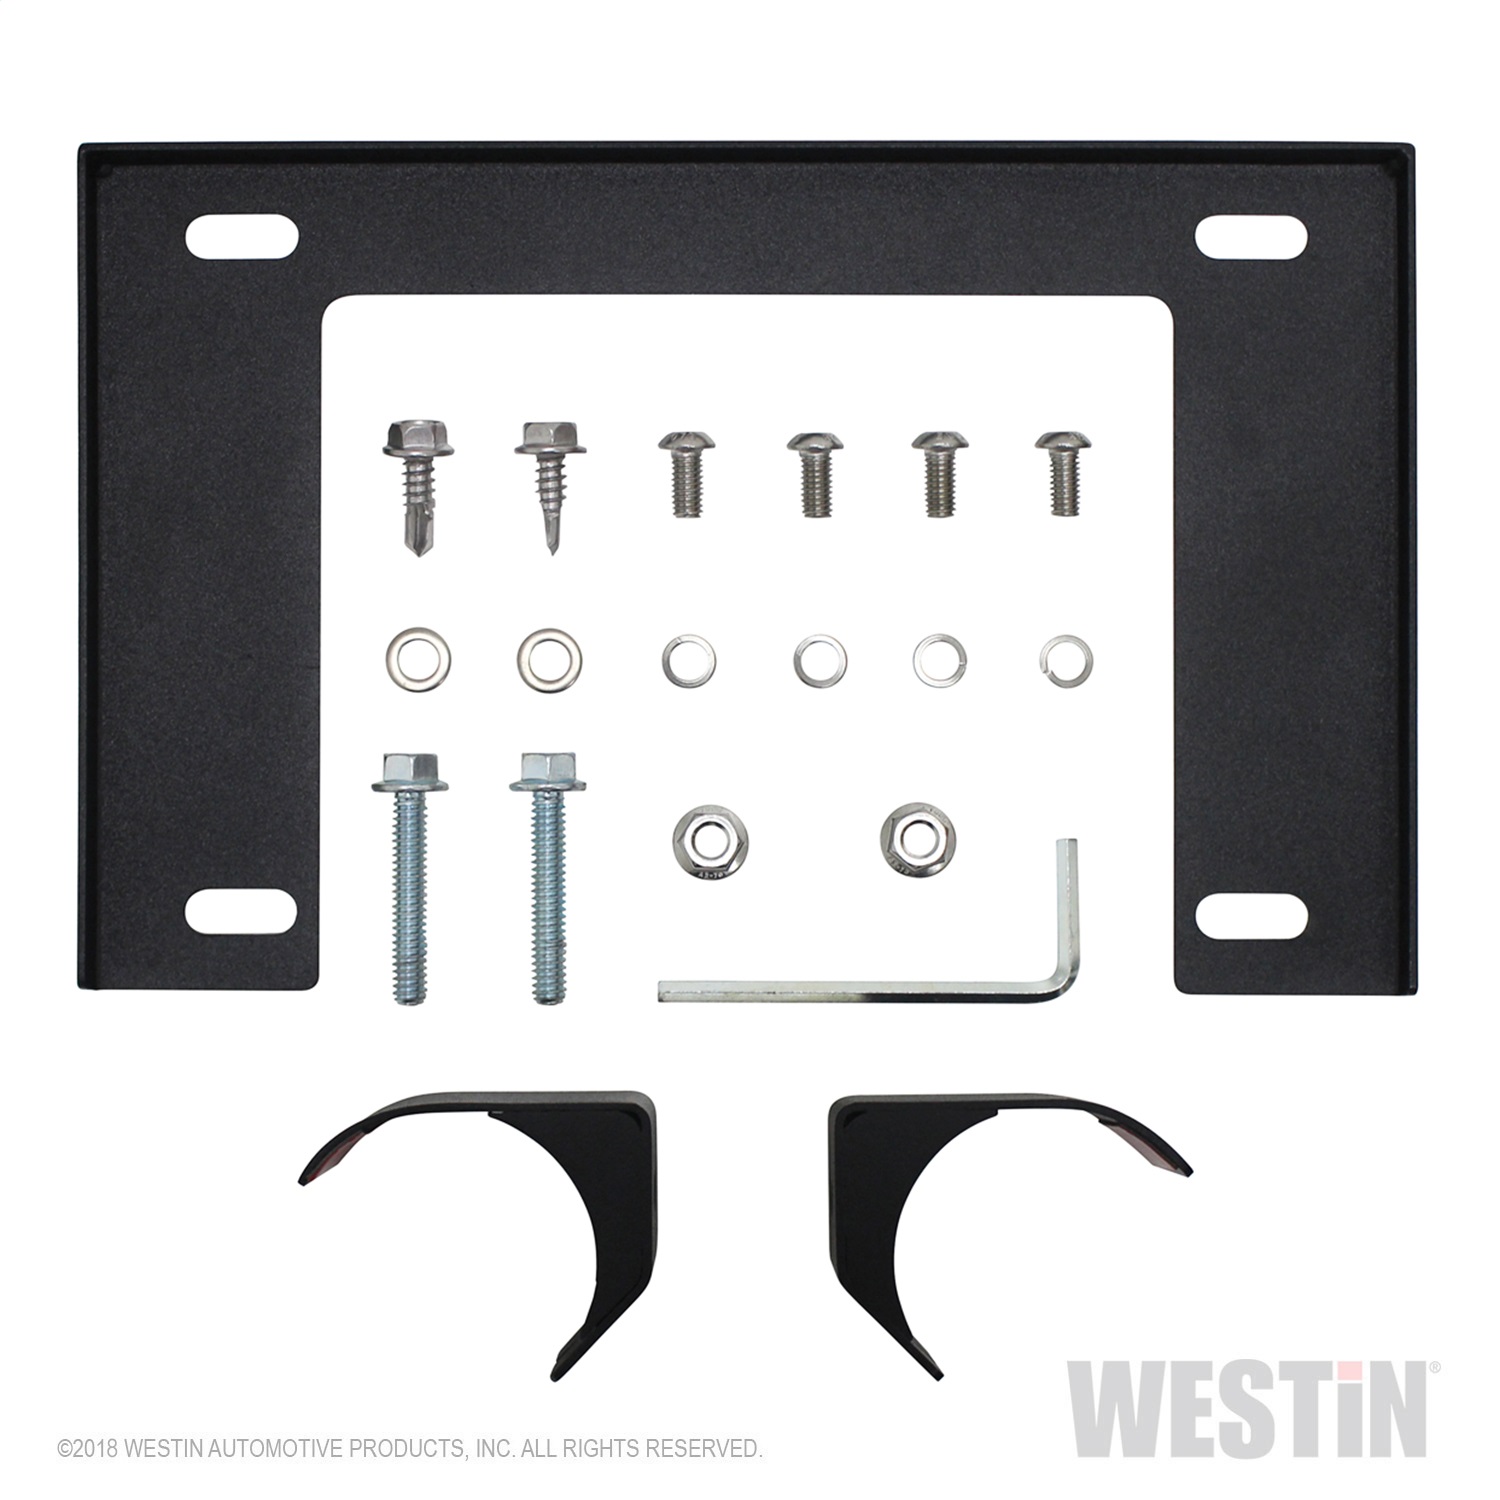 Westin 58-60055 Outlaw Bumper License Plate Mount